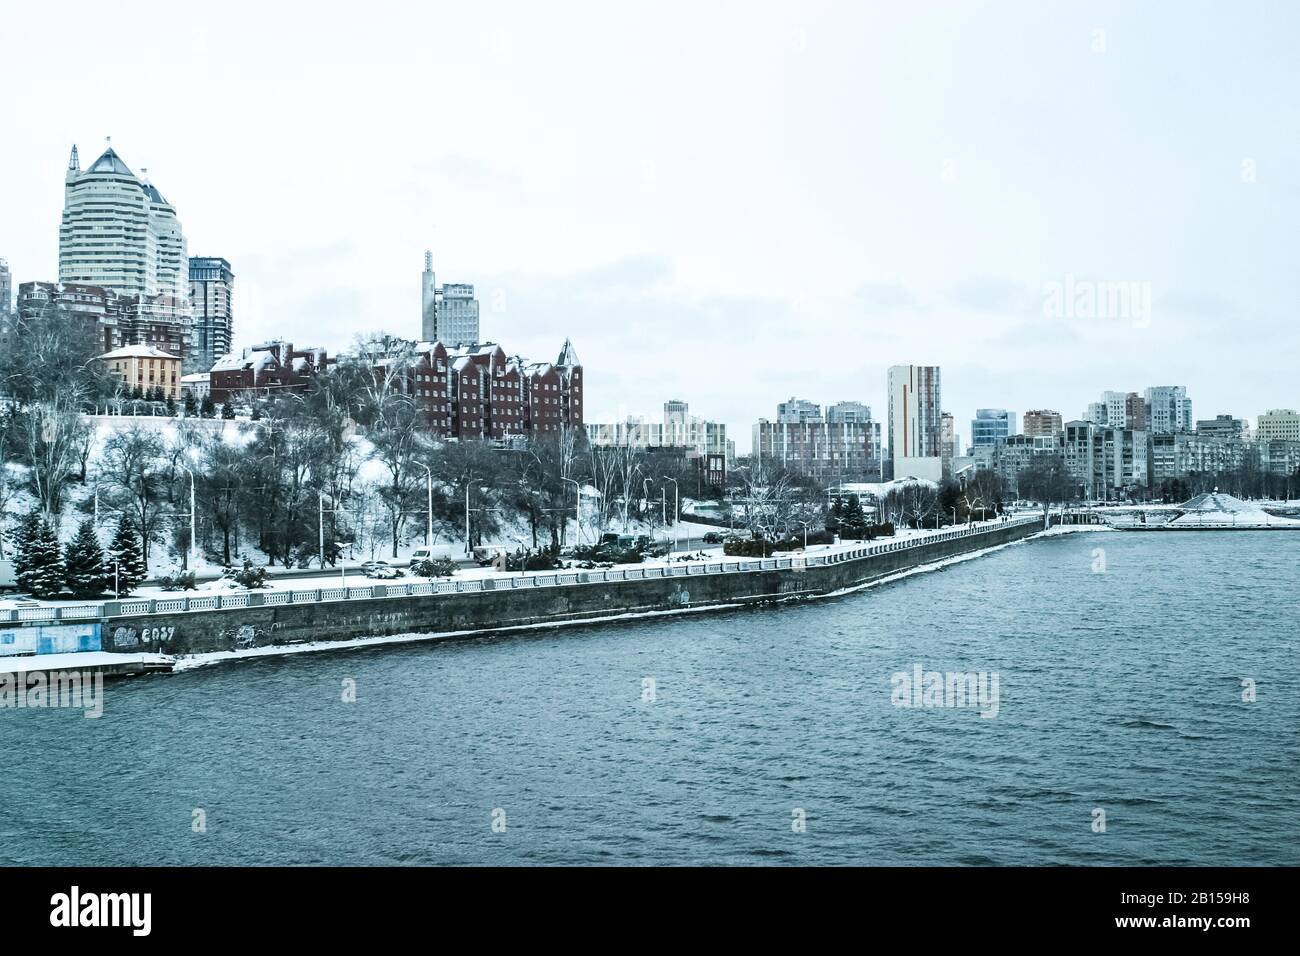 Dnipro city landscape in winter Stock Photo